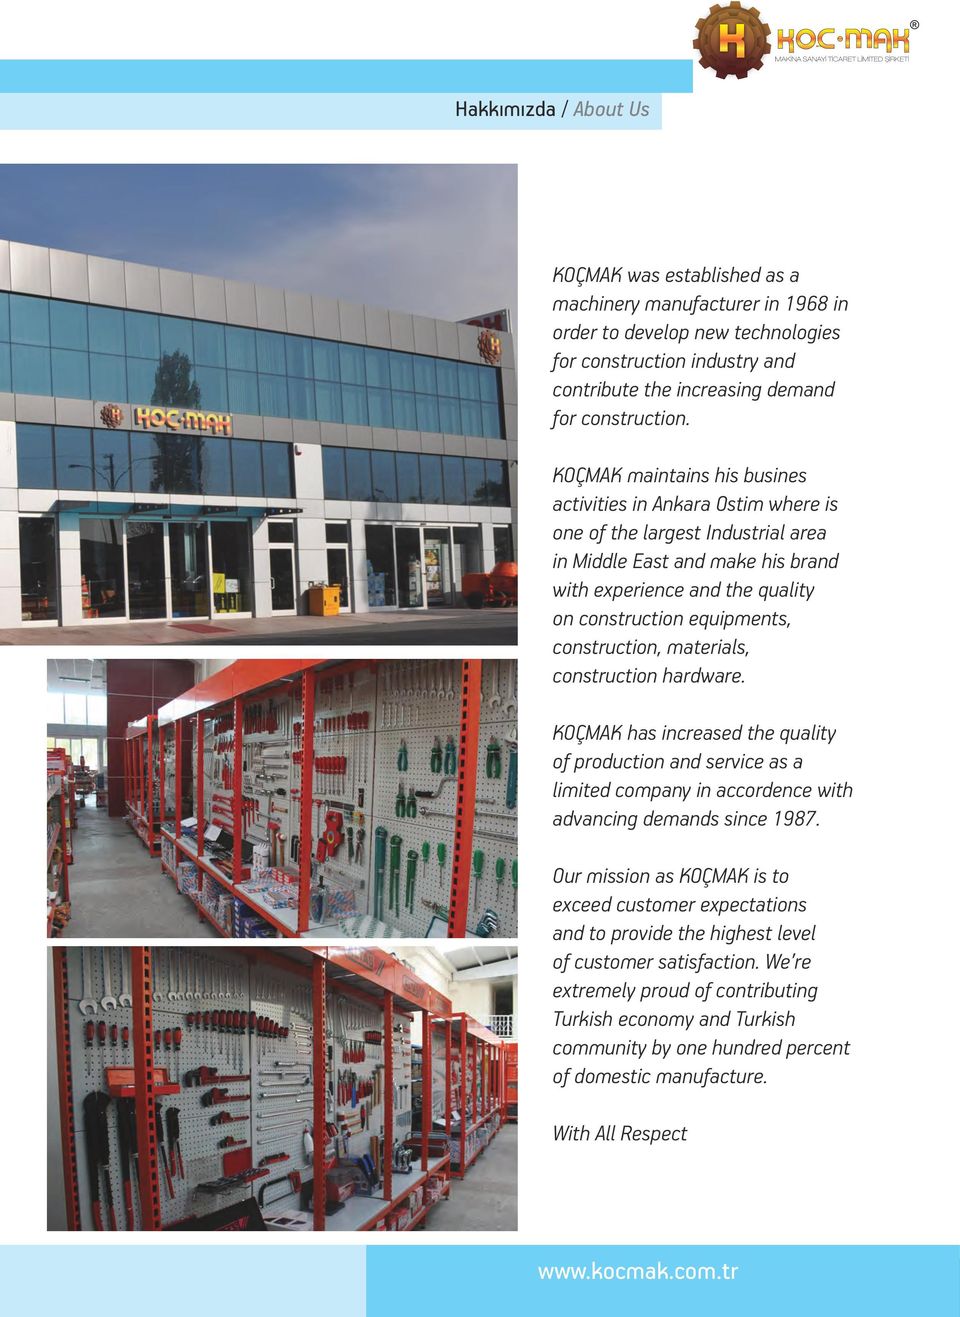 KOÇMAK maintains his busines activities in Ankara Ostim where is one of the largest Industrial area in Middle East and make his brand with experience and the quality on construction equipments,